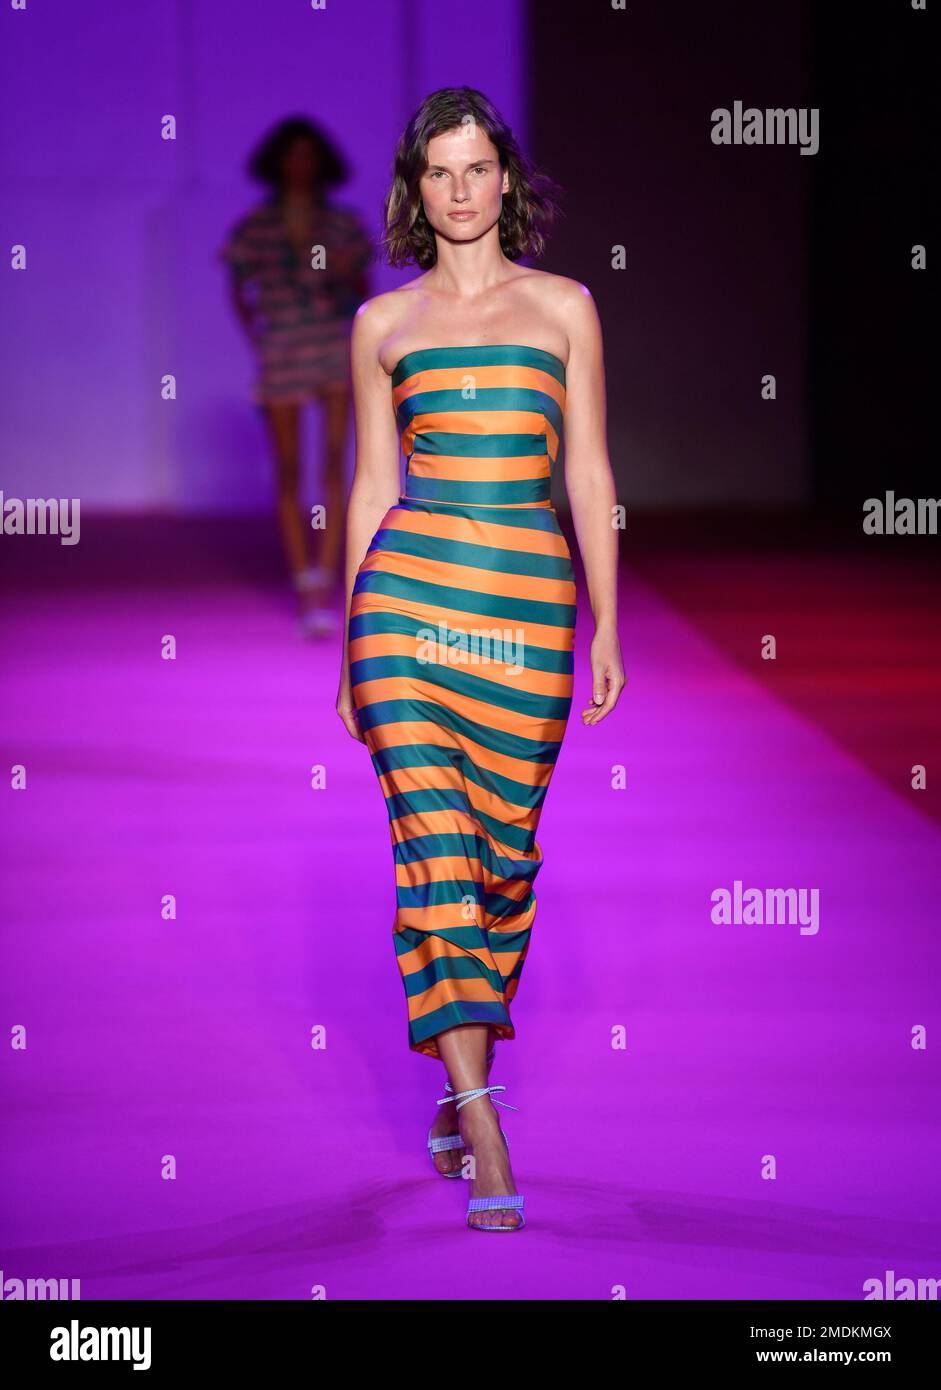 A model walks the runway at the Brandon Maxwell spring/summer 2022 fashion  show in the Brooklyn borough of New York during Fashion Week on Friday,  Sept. 10, 2021. (Photo by Evan Agostini/Invision/AP